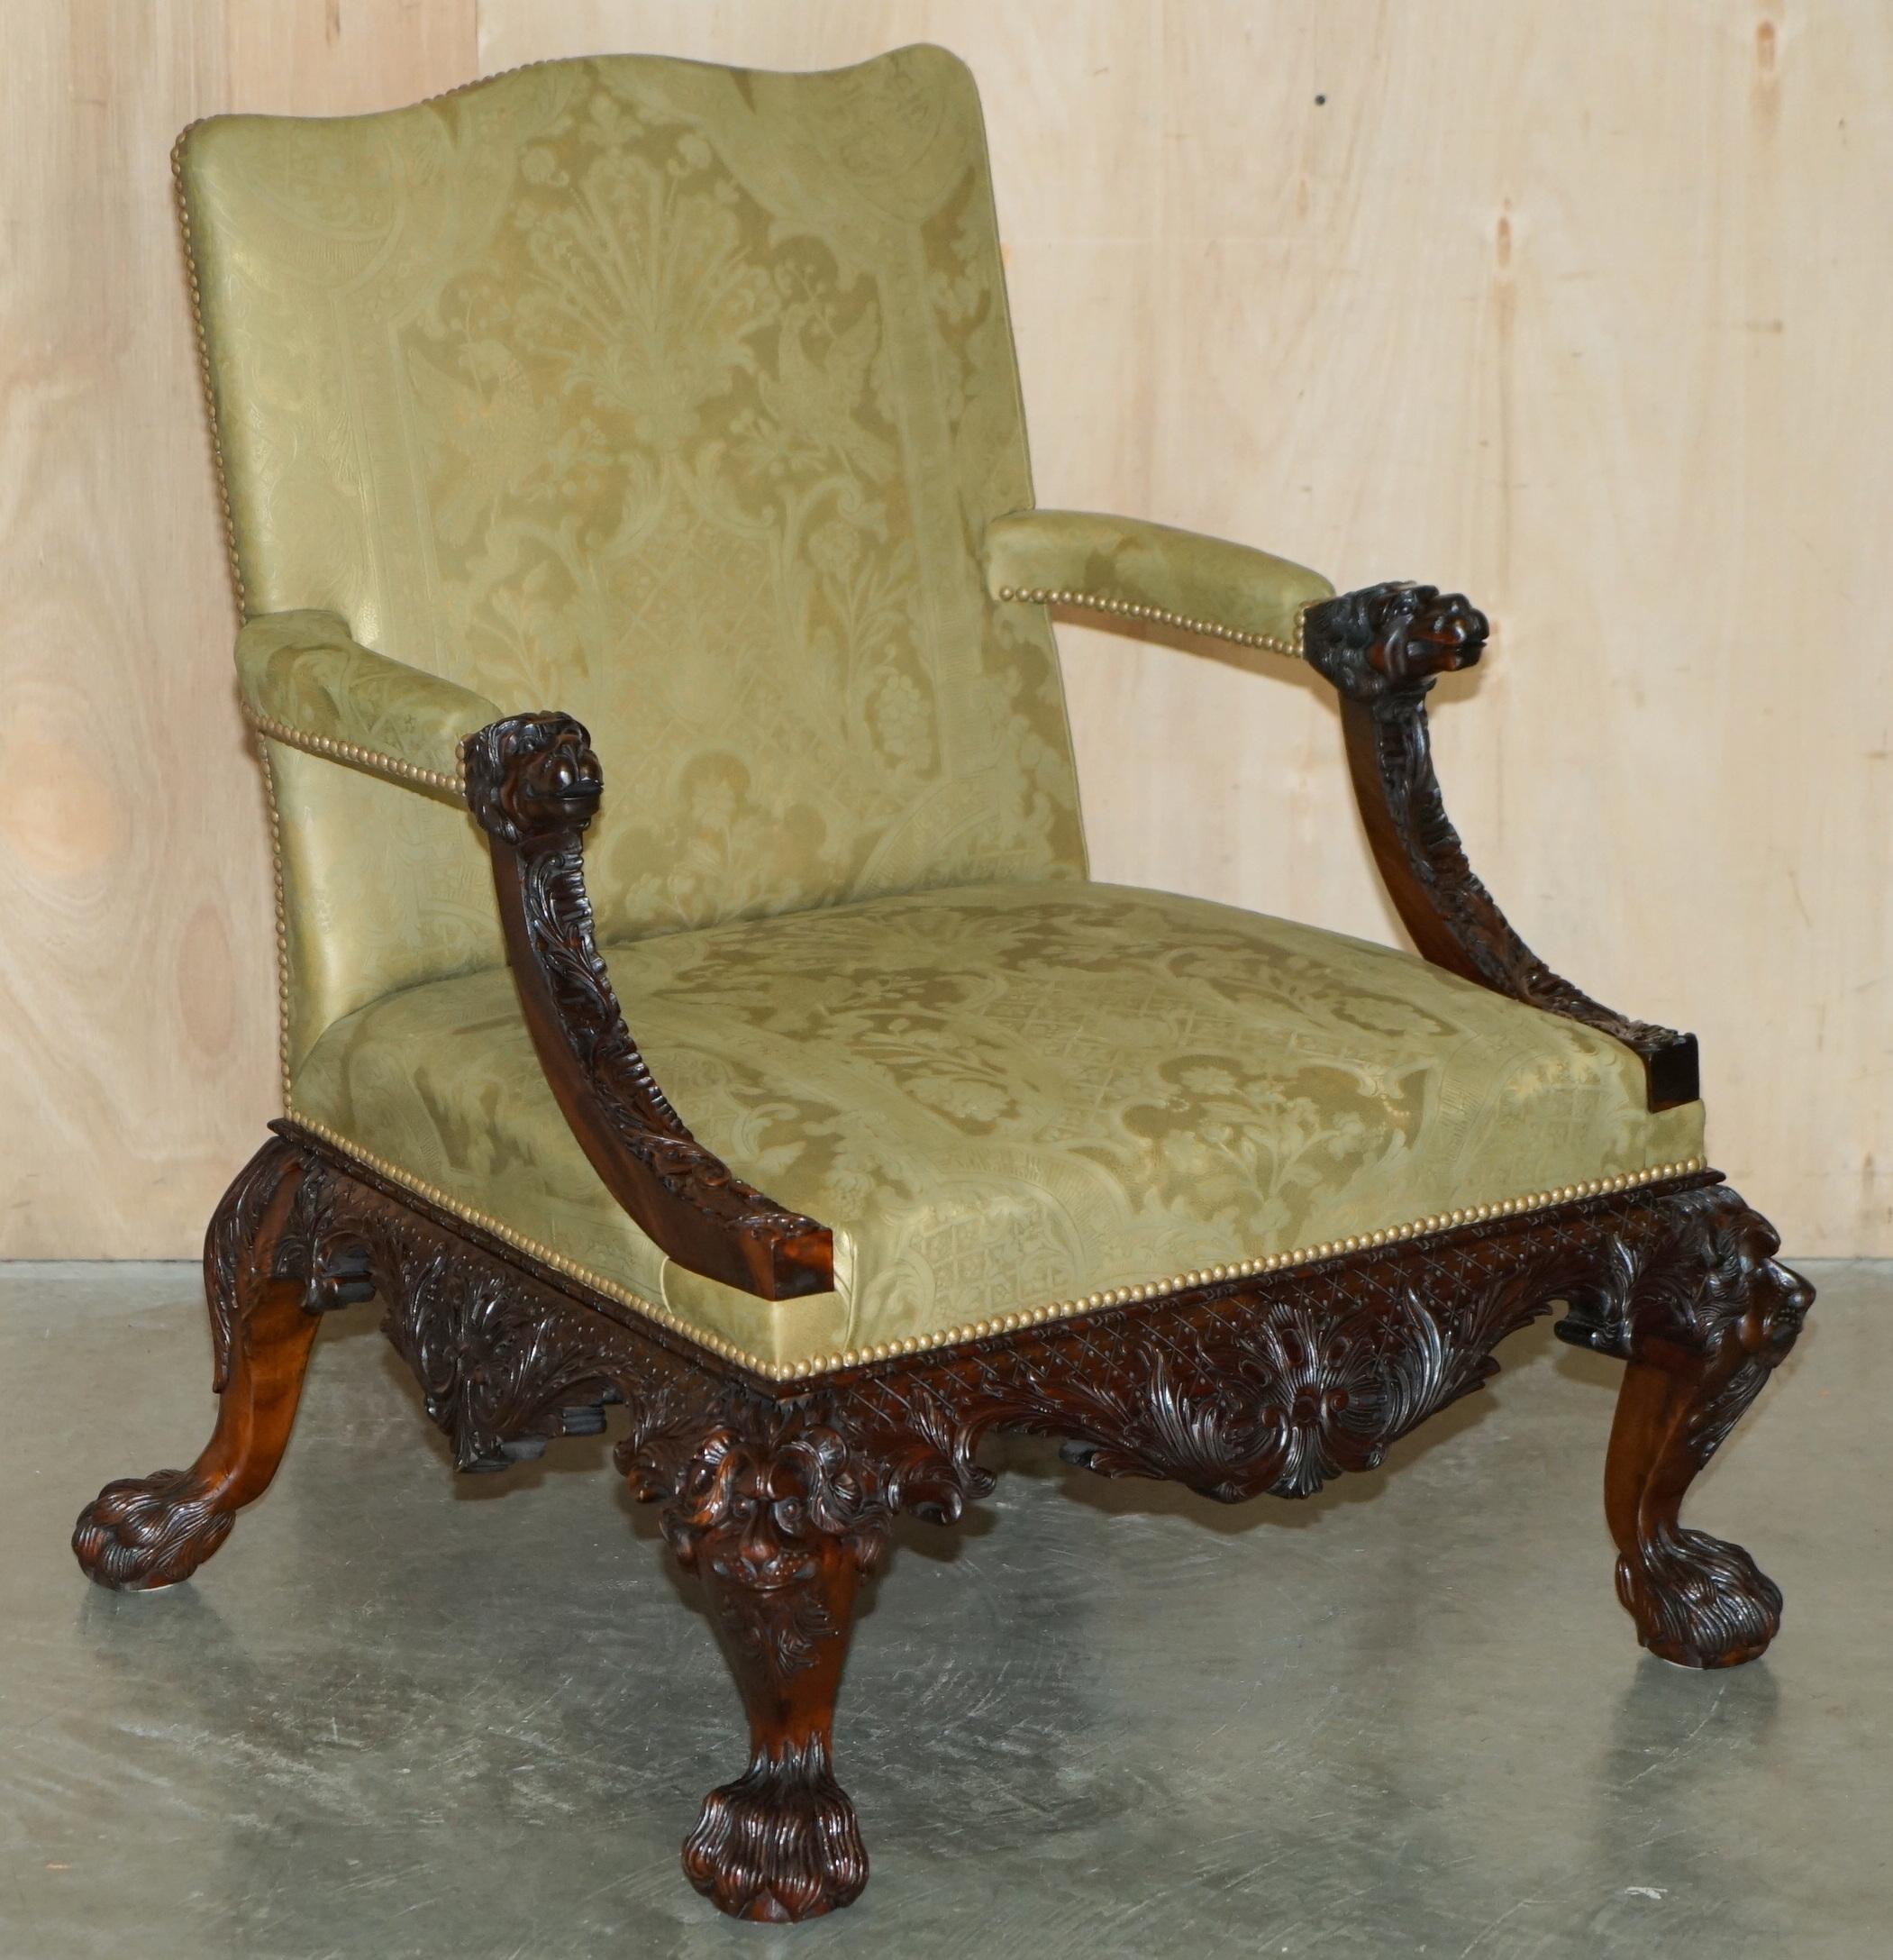 FINE PAiR OF LARGE CARved GAINSBOROUGH ARMCHAIRS AFTER GILES GRENDEY 1693-1780 im Angebot 12